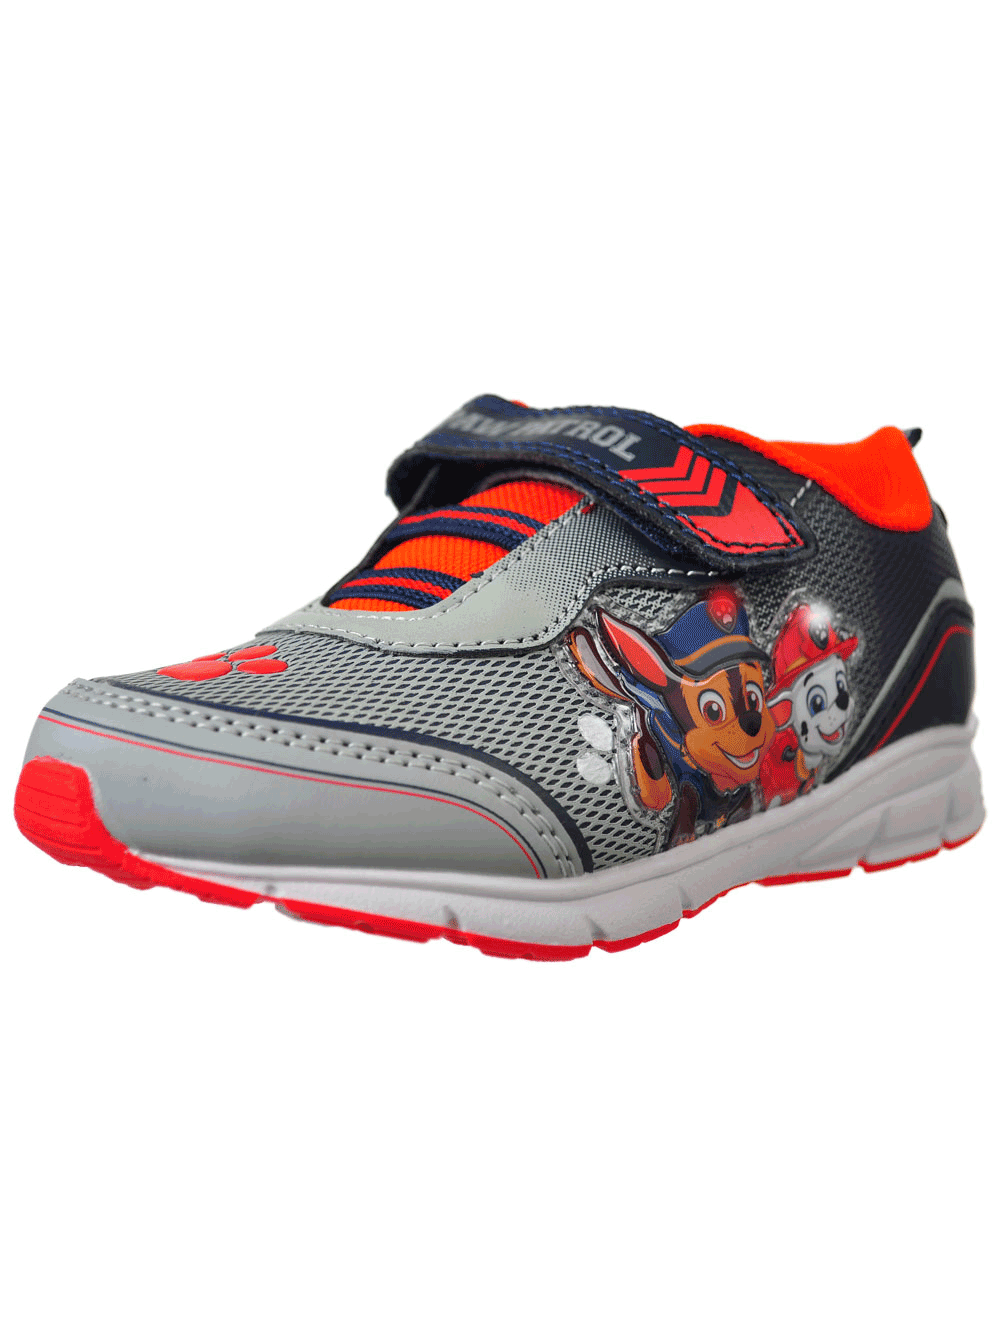 paw patrol tennis shoes for toddlers